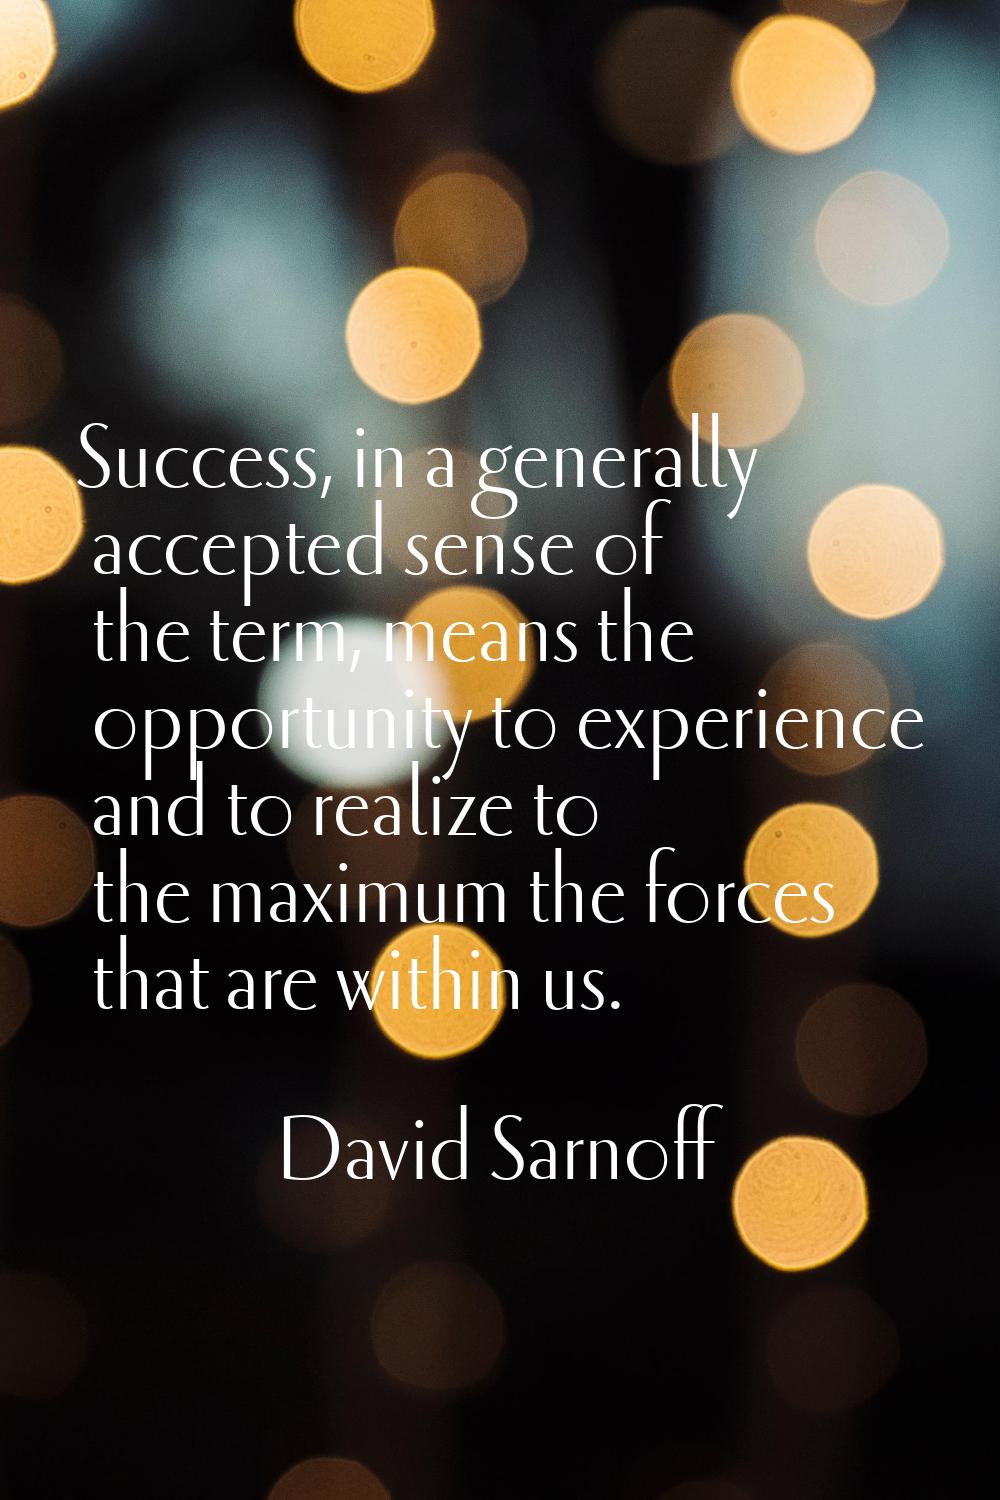 Success, in a generally accepted sense of the term, means the opportunity to experience and to real